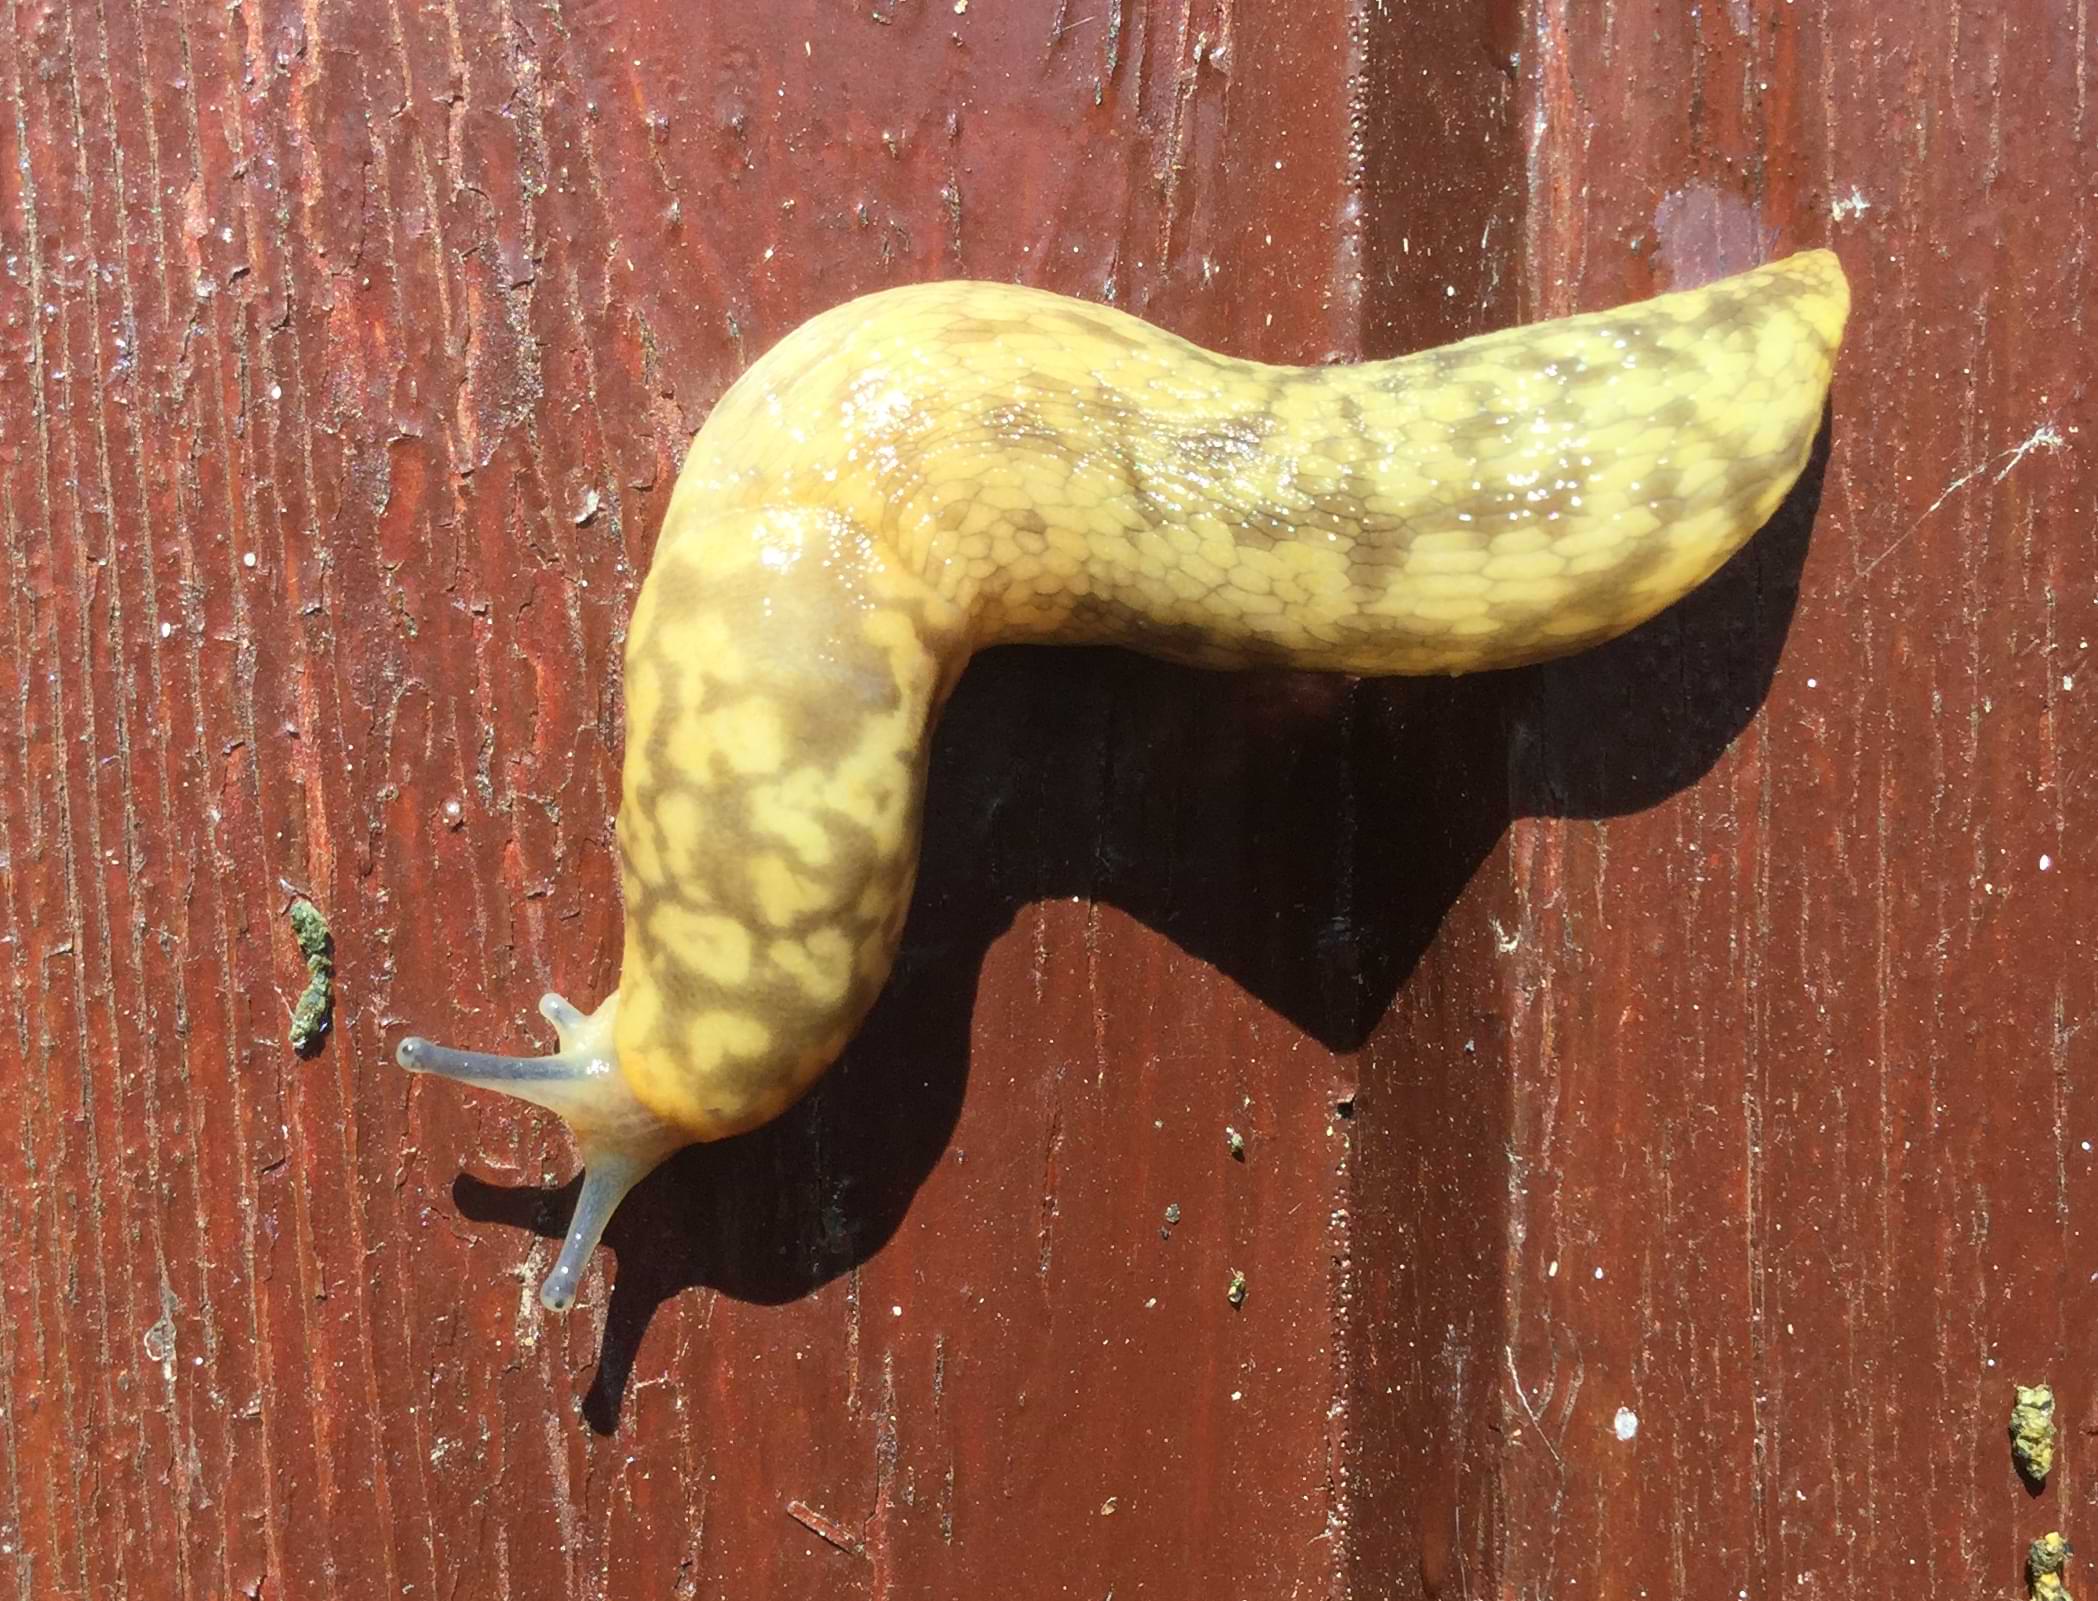 A large yellow slug with light-brown markings, and blue tentacles on its head. Its body is curled in a quaver shape.